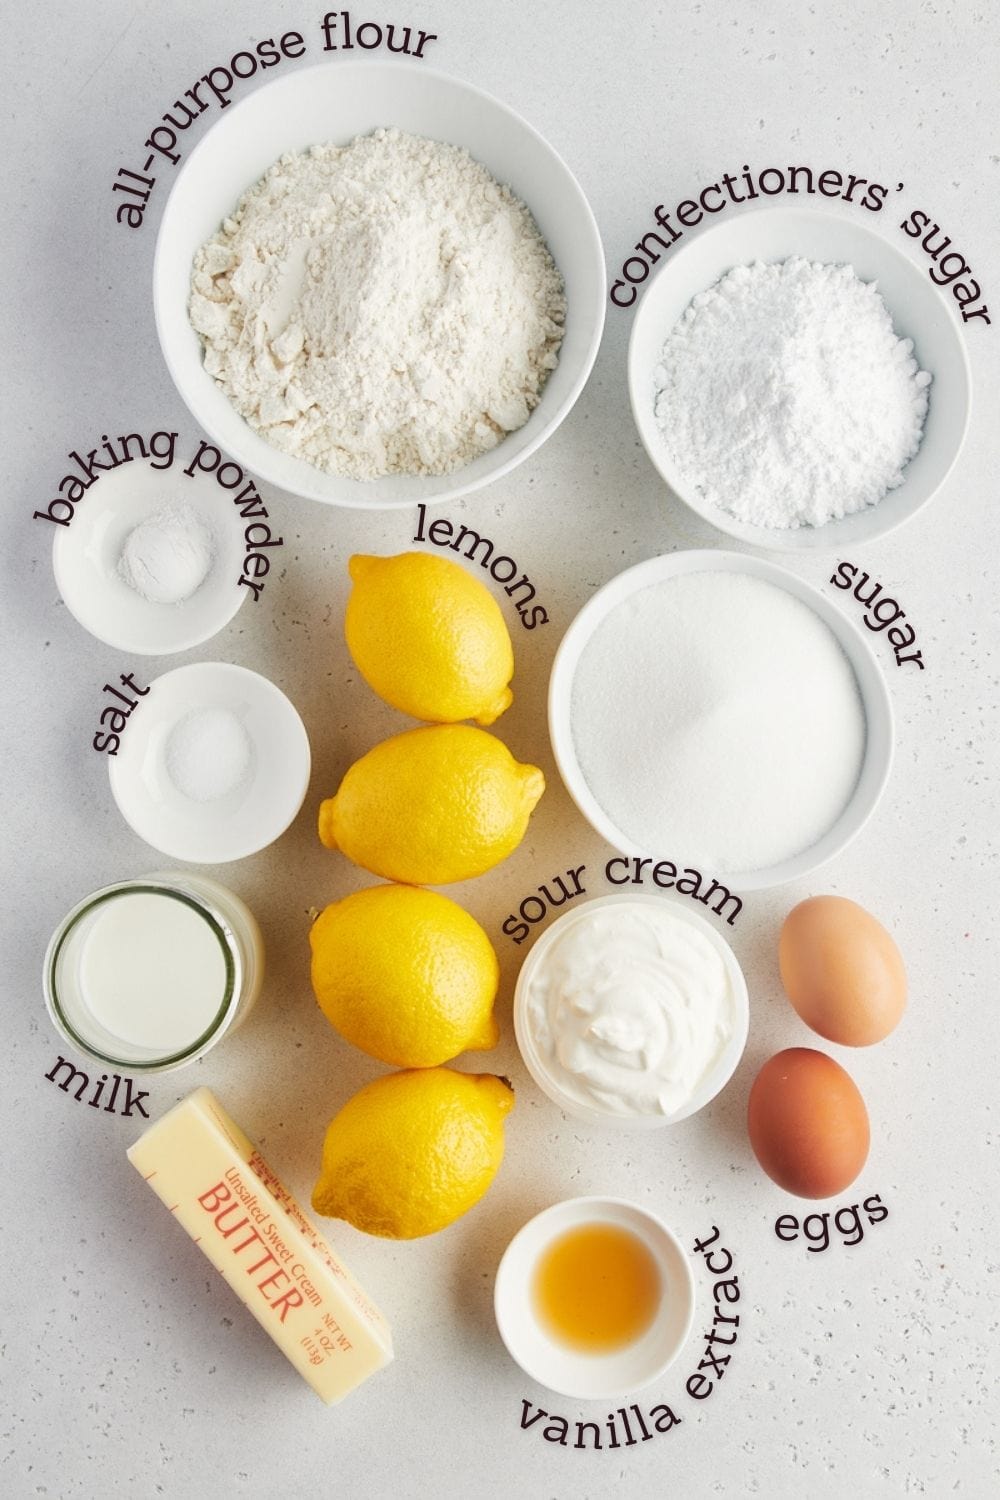 Overhead view of ingredients for lemon loaf cake with labels